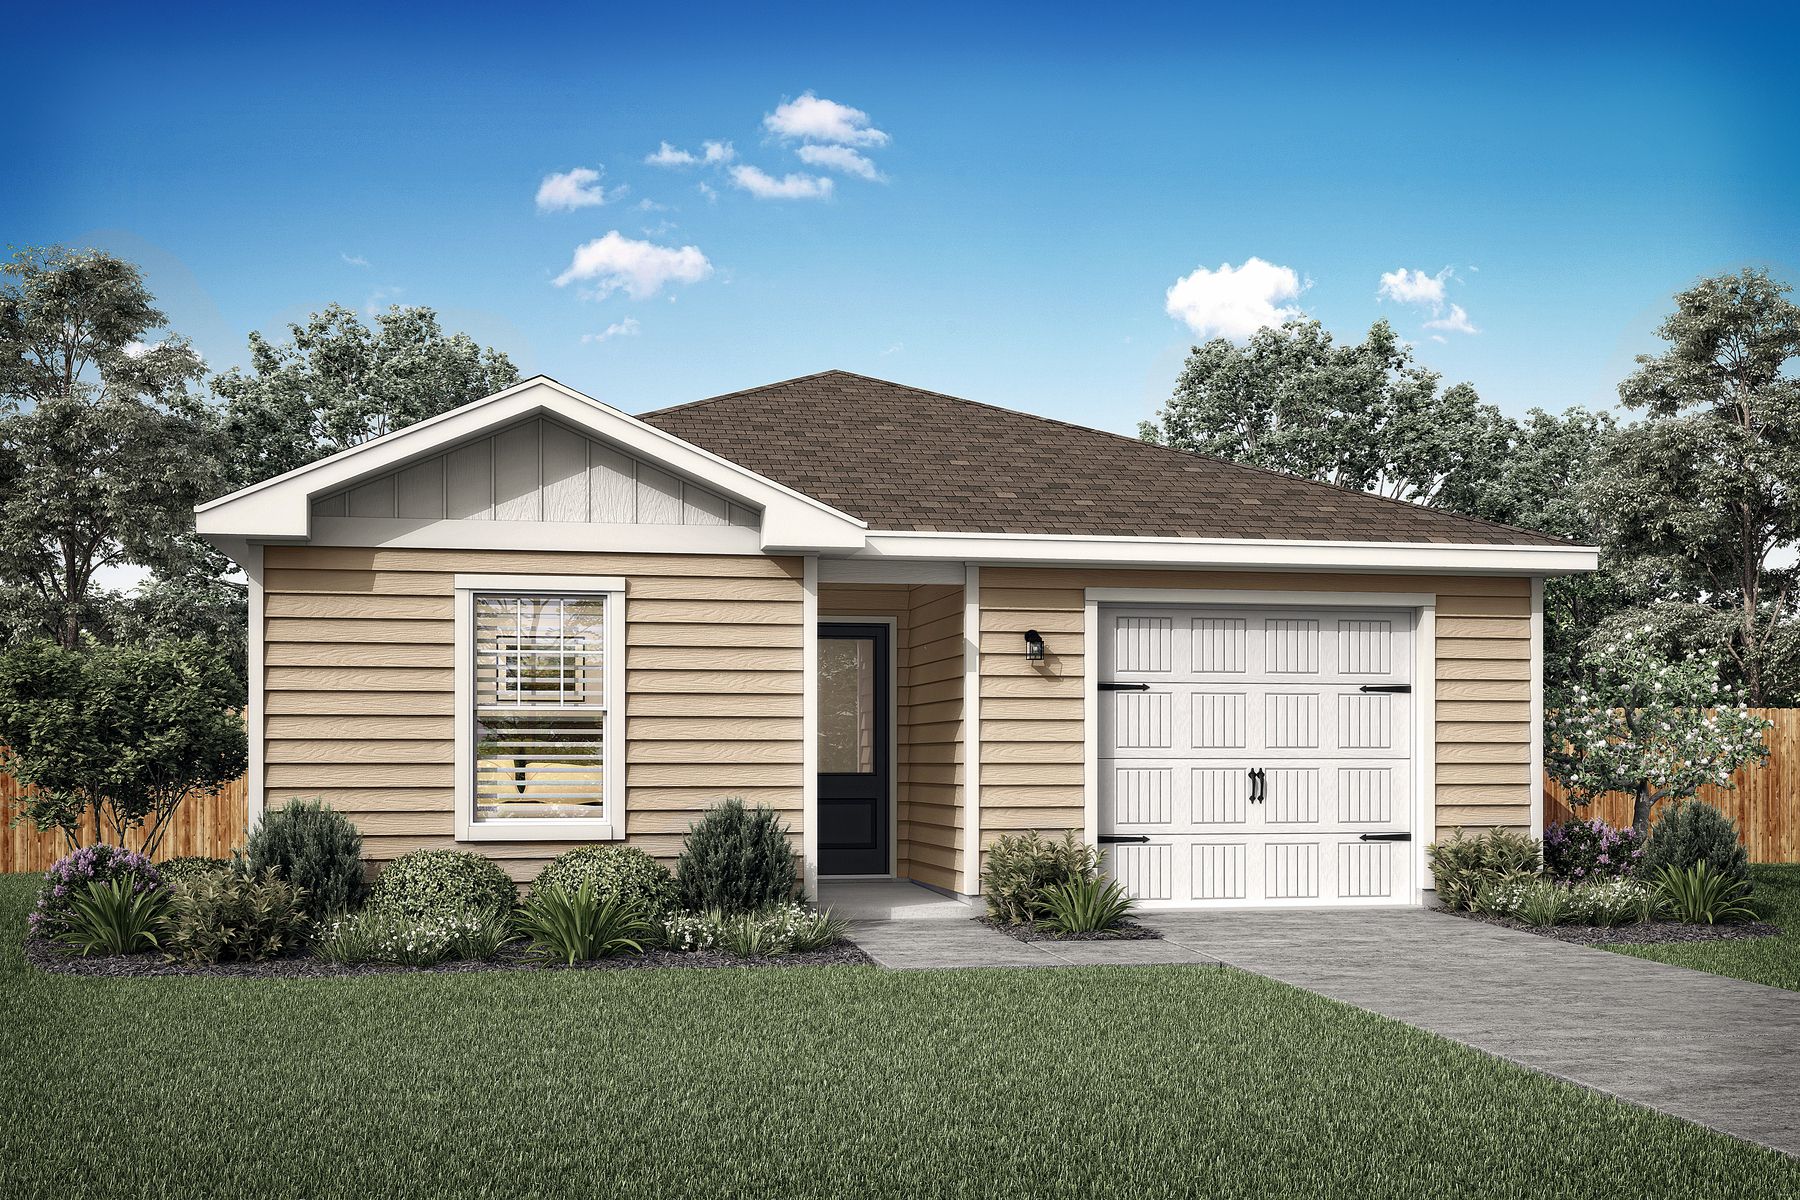 Rendering of the Ash plan with a one-car garage.:LGI Homes at Luckey Ranch